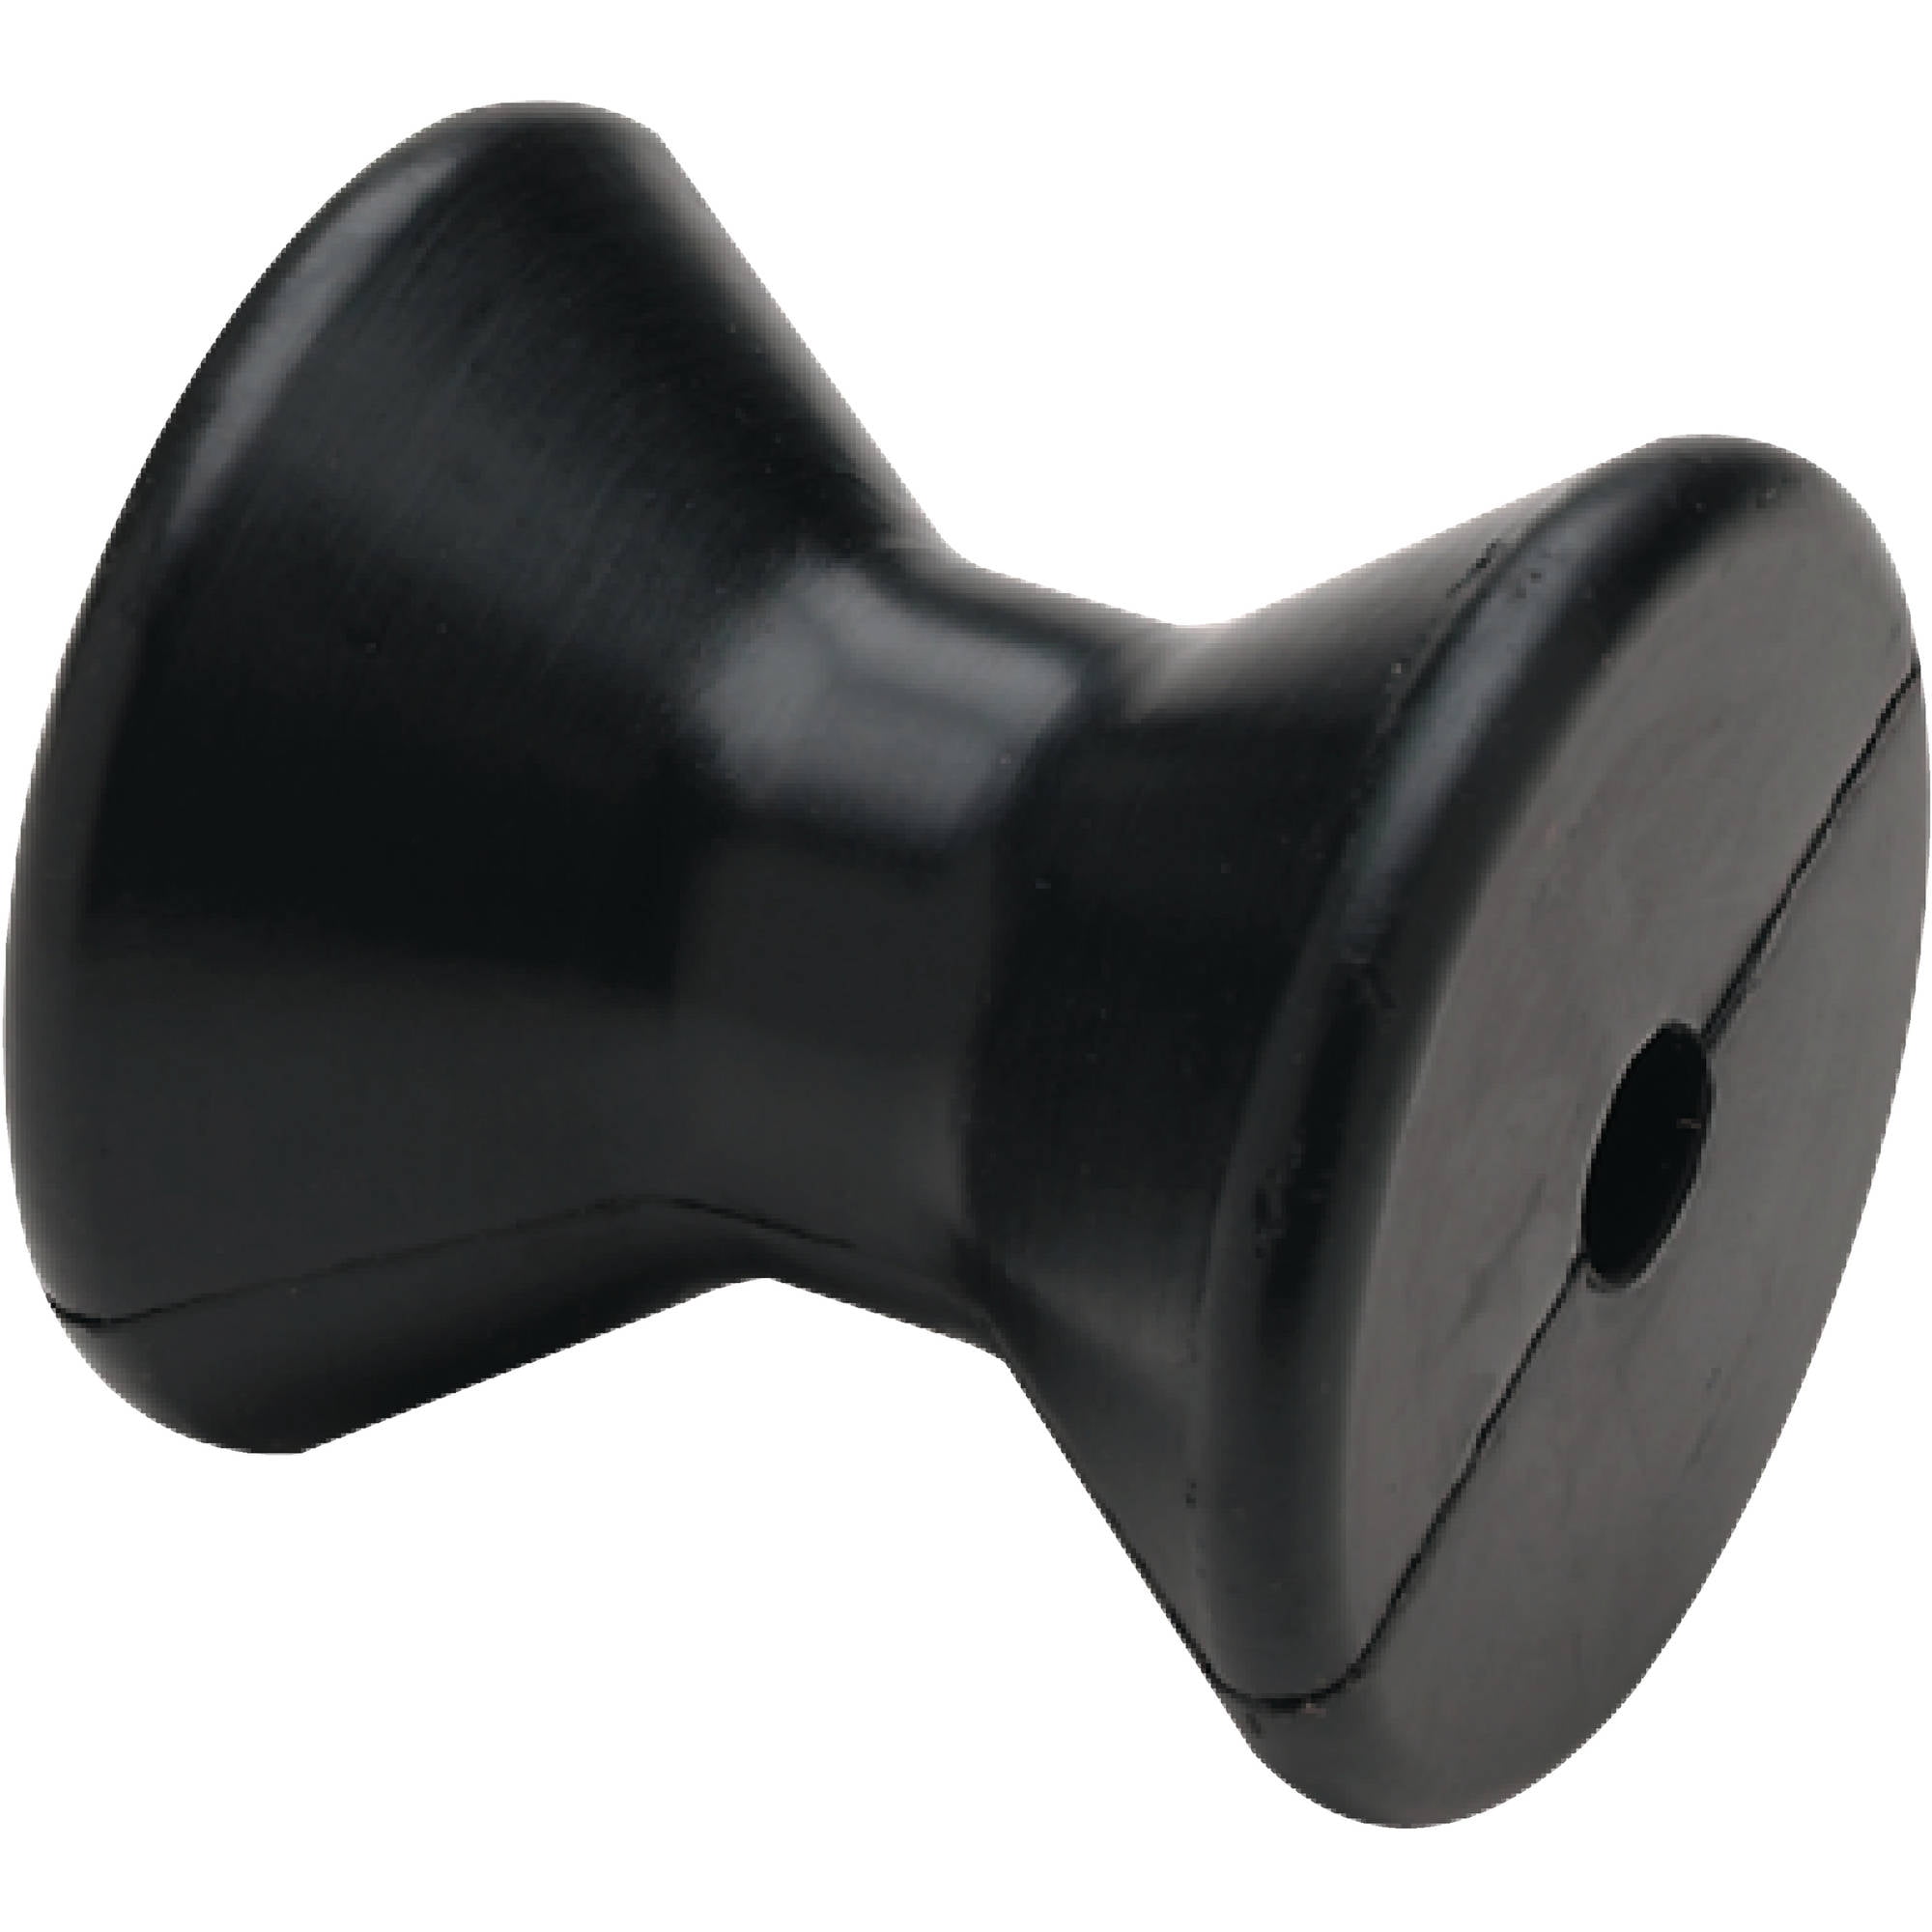 Boat Marine Trailer Black Rubber Bow Roller 4 Length With 1/2 ID Hole